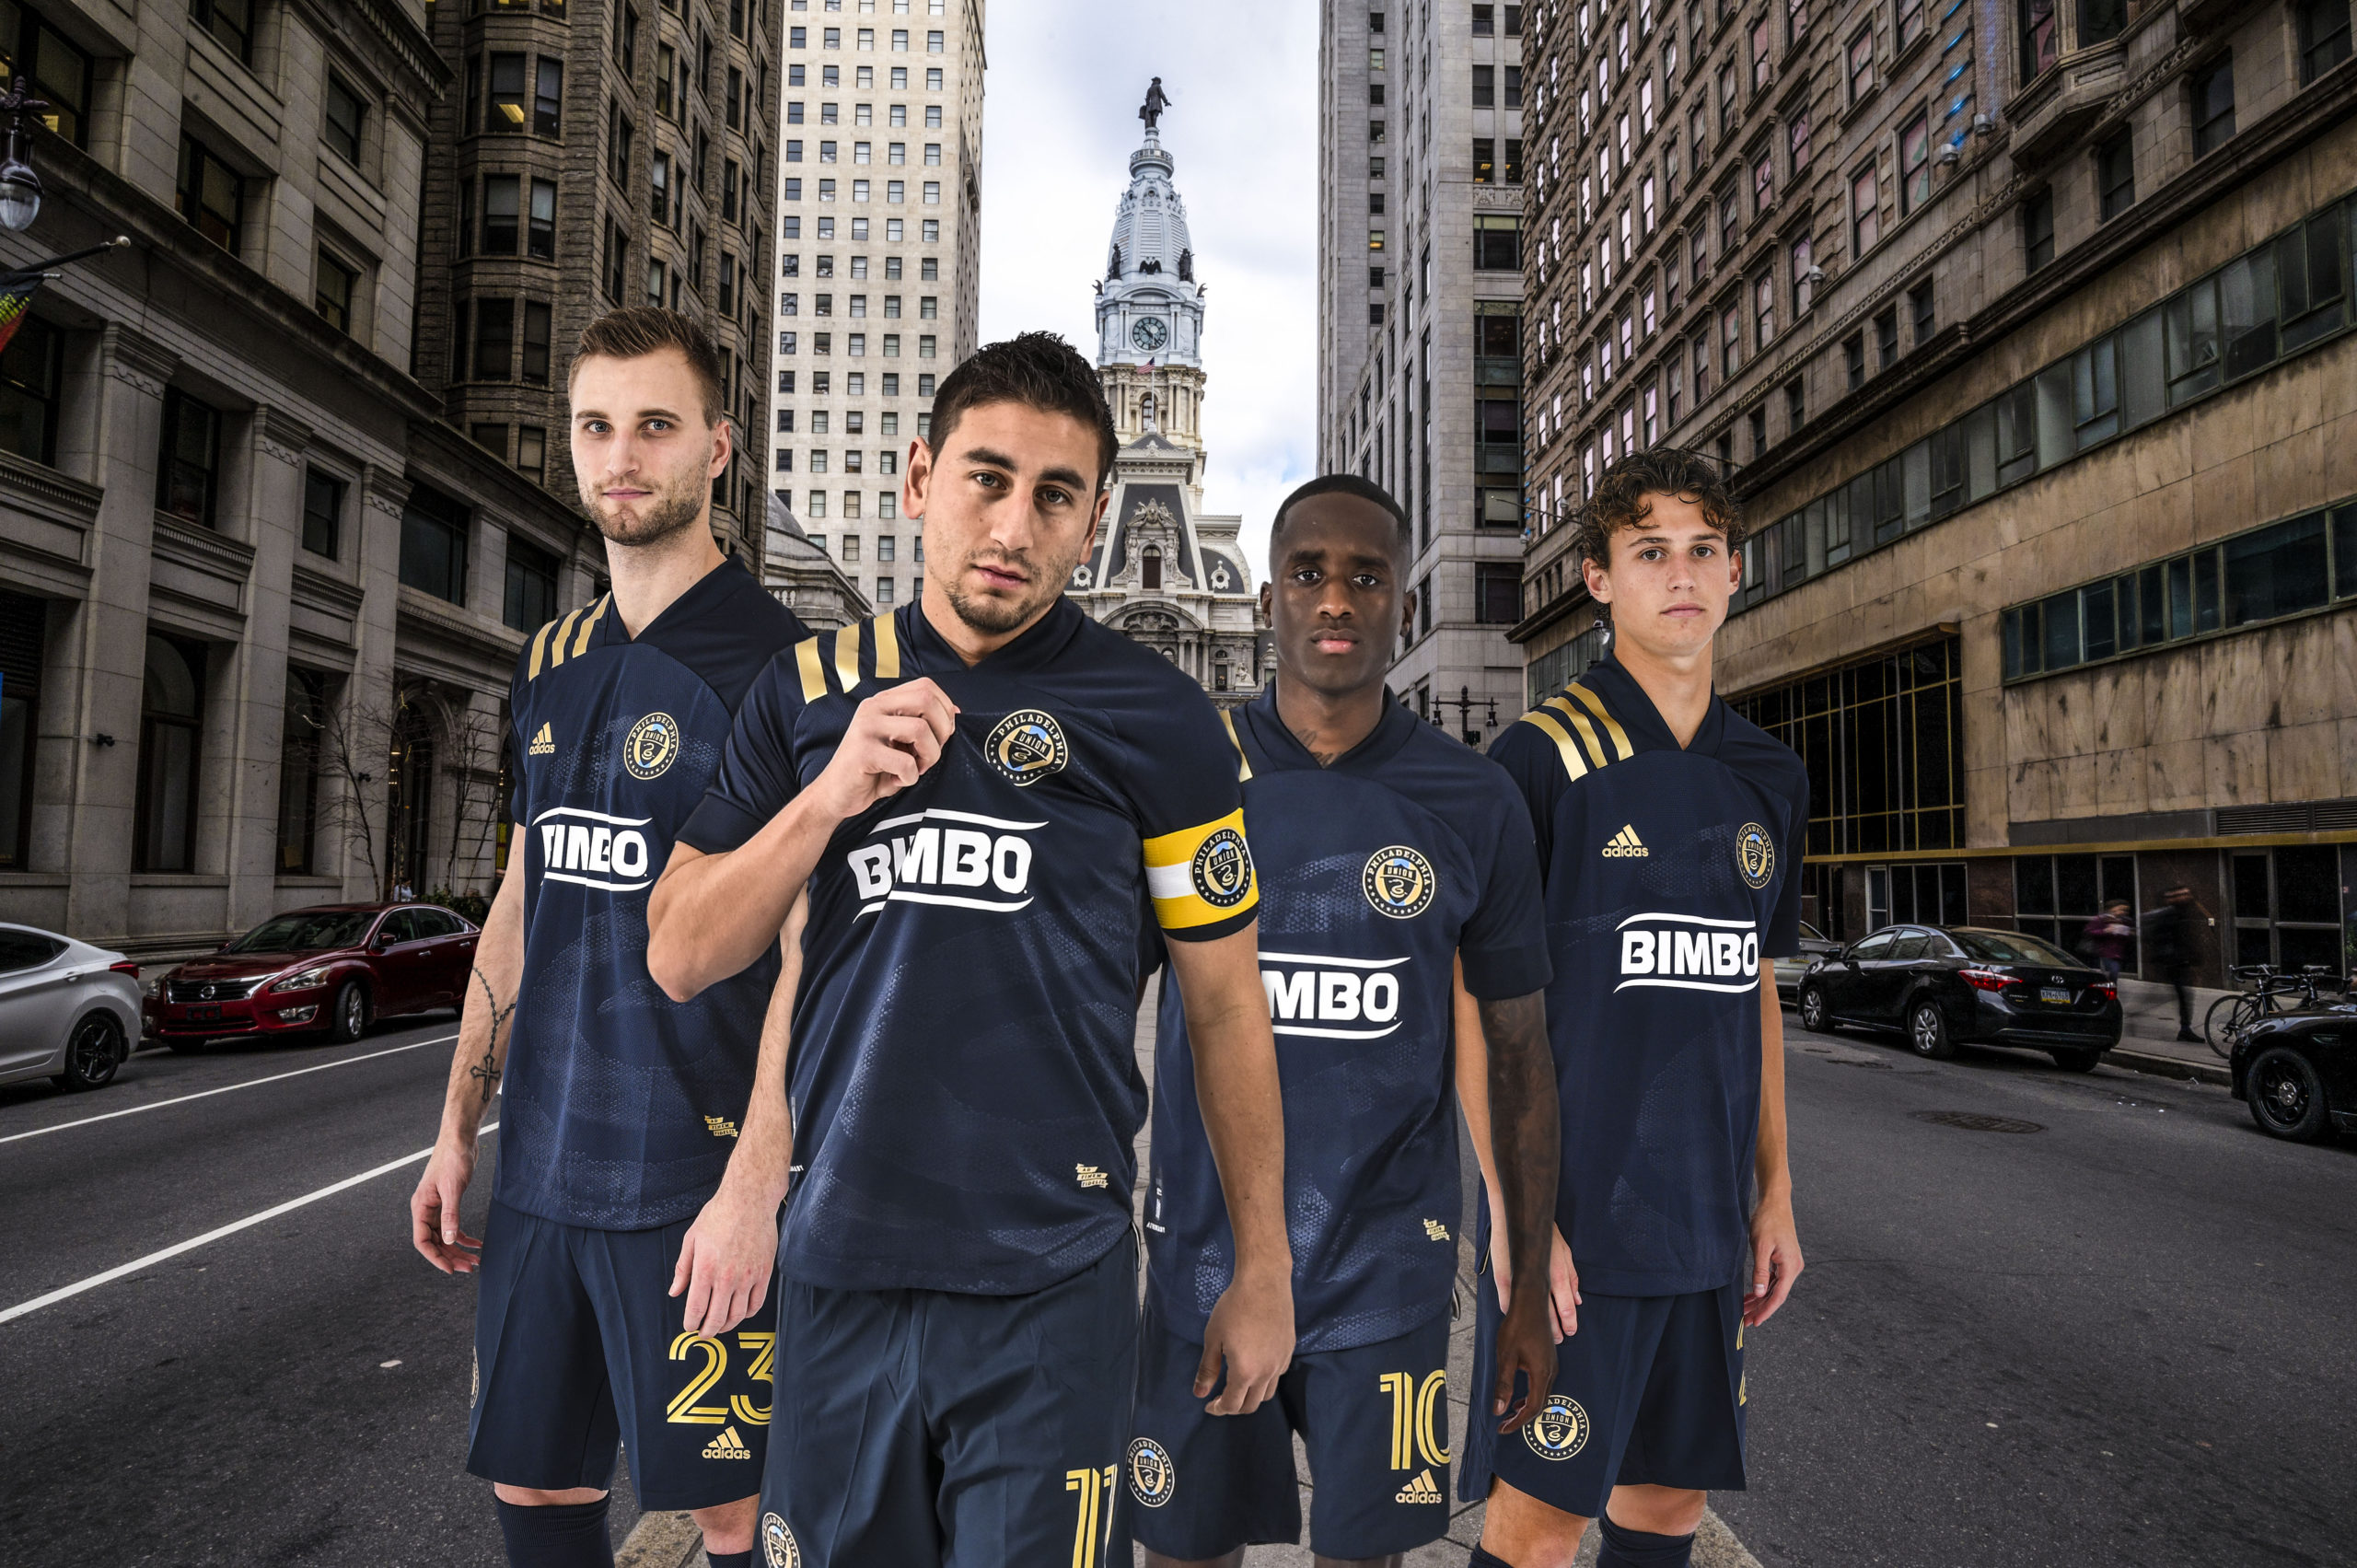 Union pairs with Mexican baker Bimbo in sponsorship deal